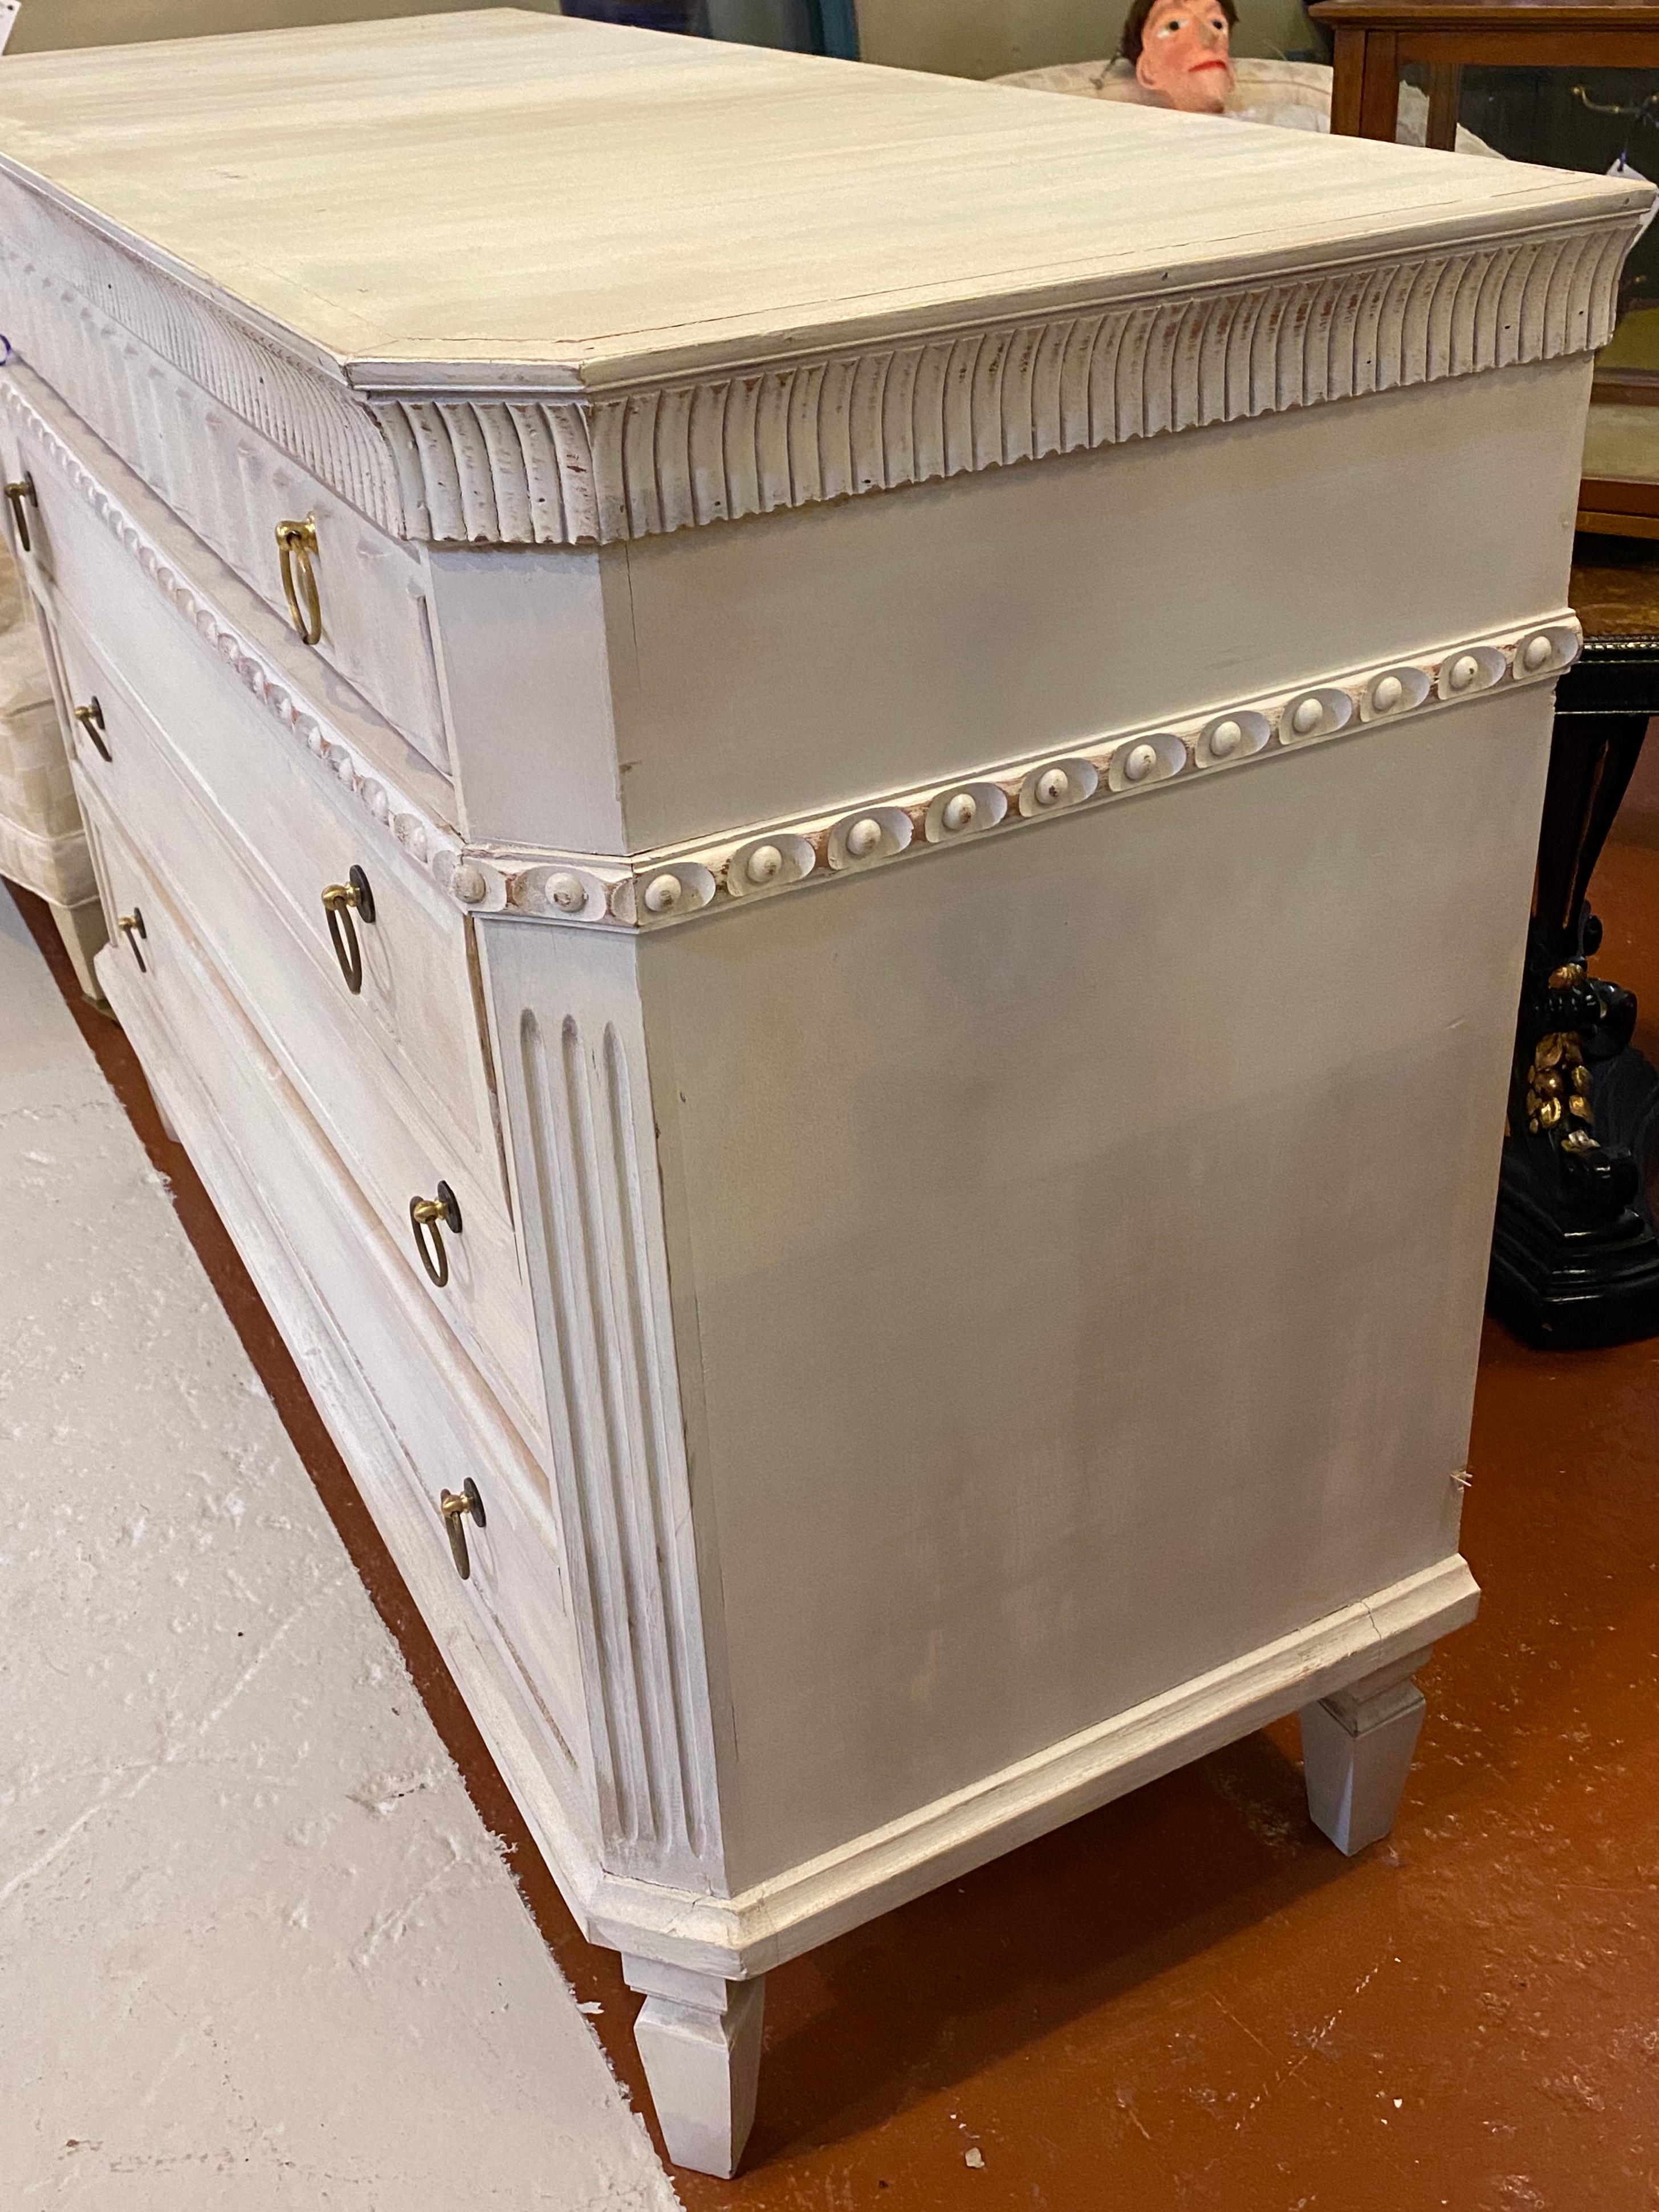 20th Century Swedish Painted Commodes Nightstands Four Drawers Distressed White Finish a Pair